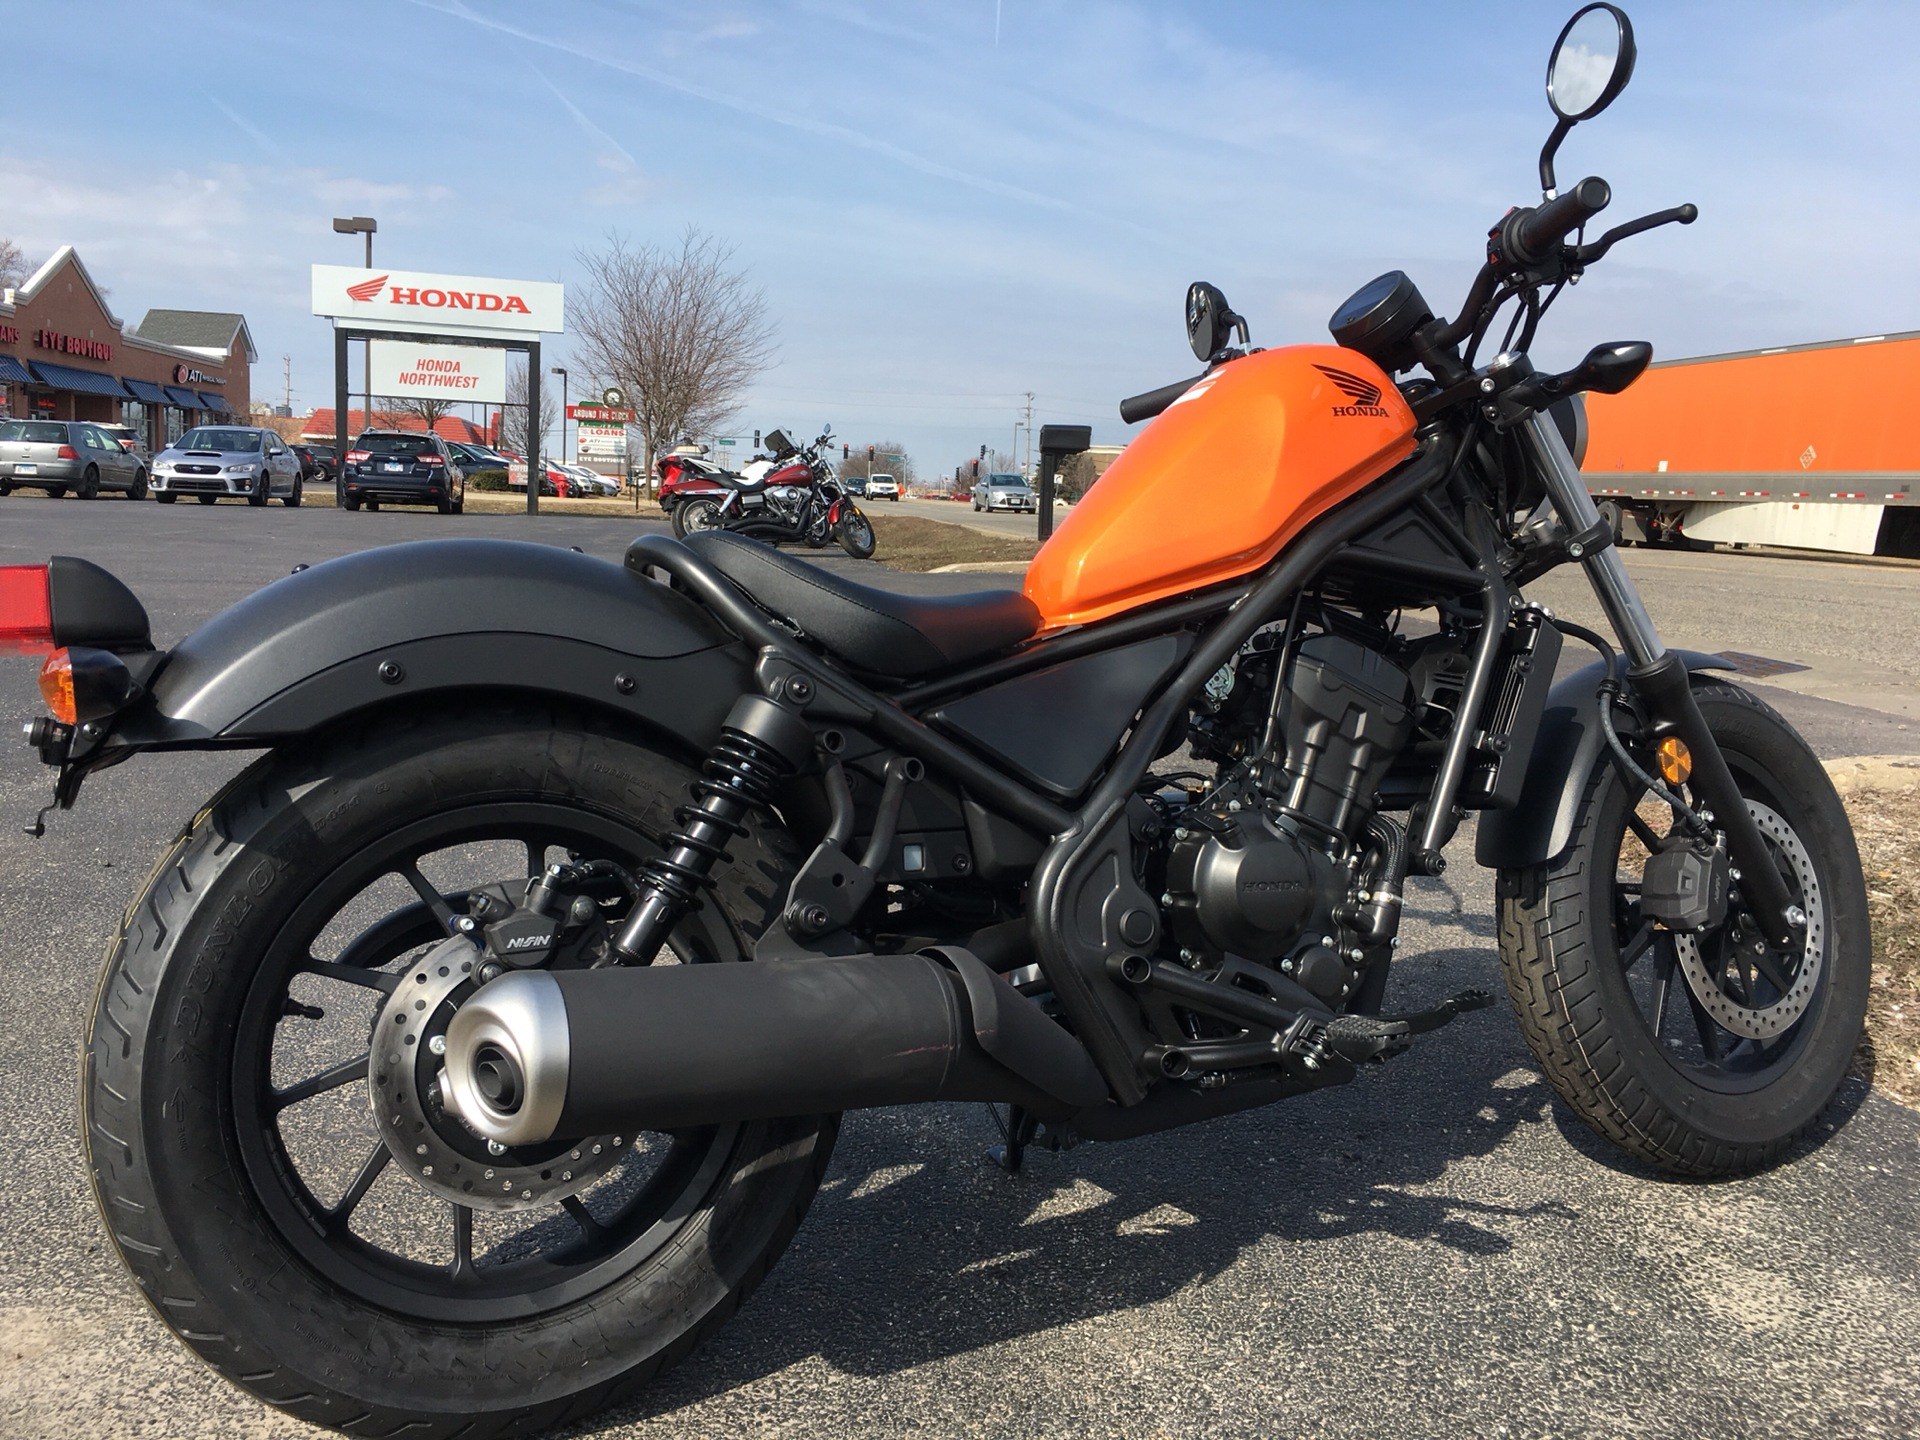 New 2019 Honda Rebel 500 ABS Motorcycles in Crystal Lake, IL | Stock ...